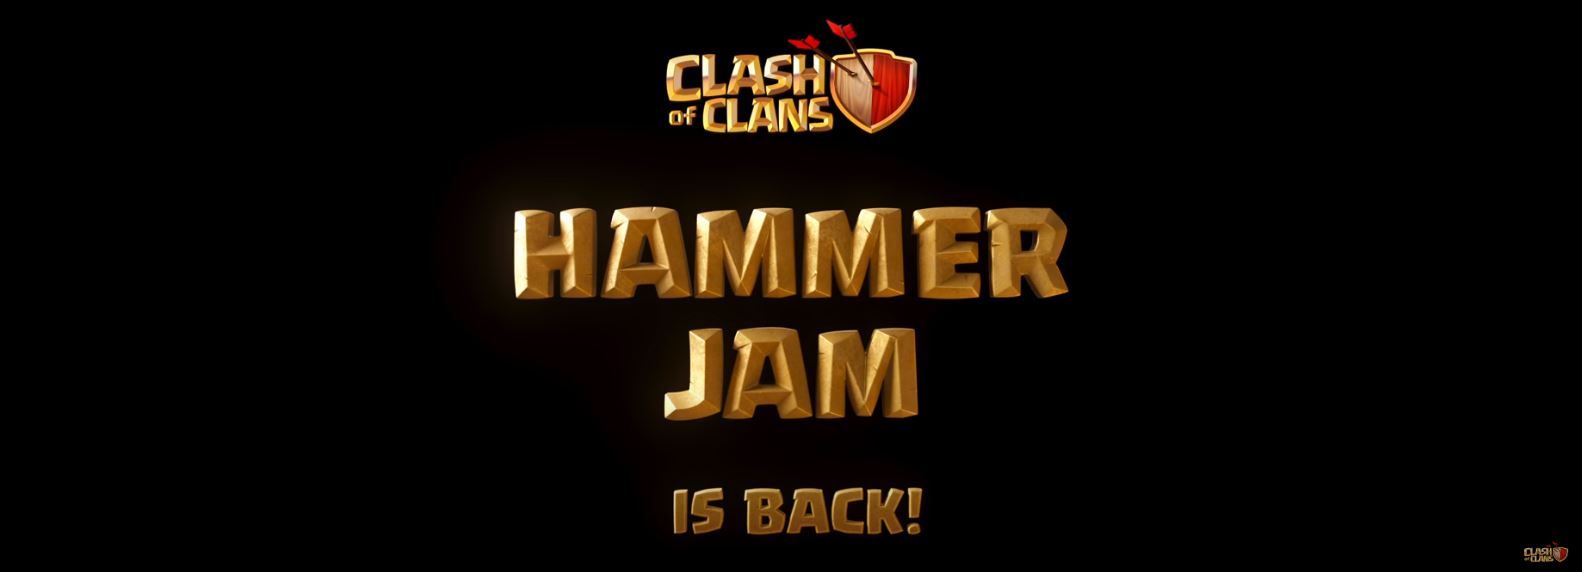 Clash of Clans Update Hammer Jam Event Will Return Once Again